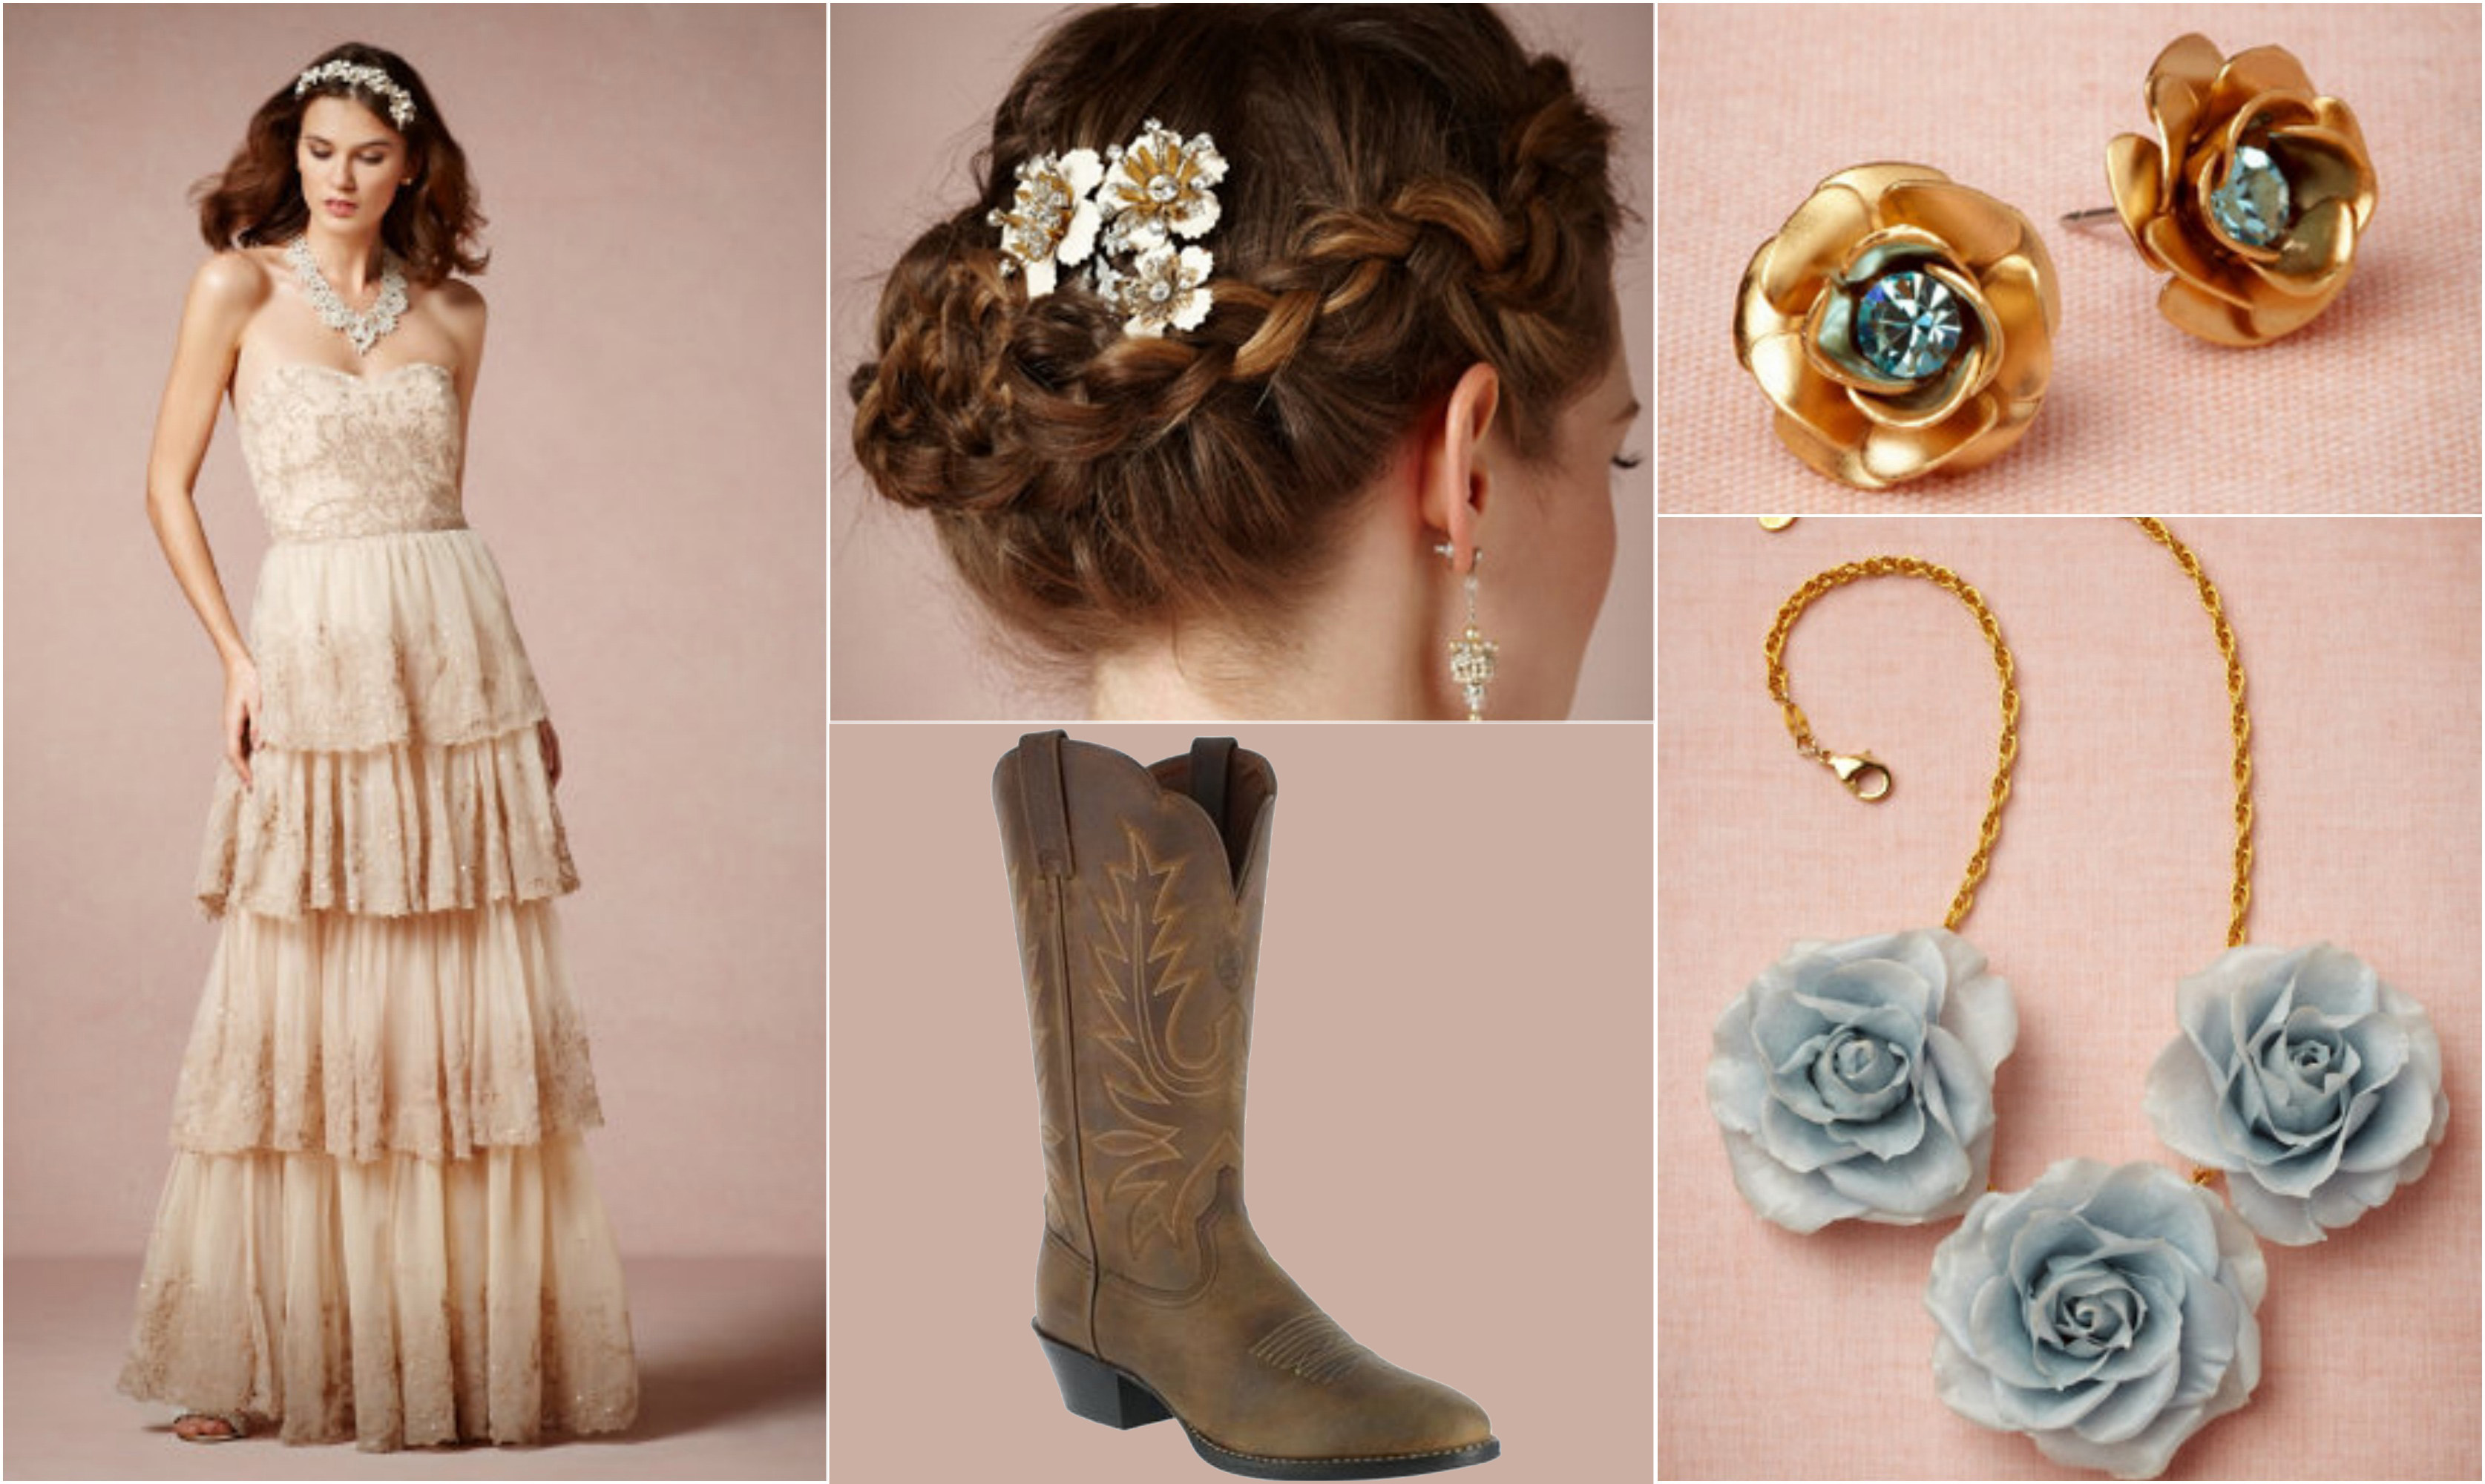 The Mother Of Bride Dresses With Cowgirl Boots To Wear Wedding